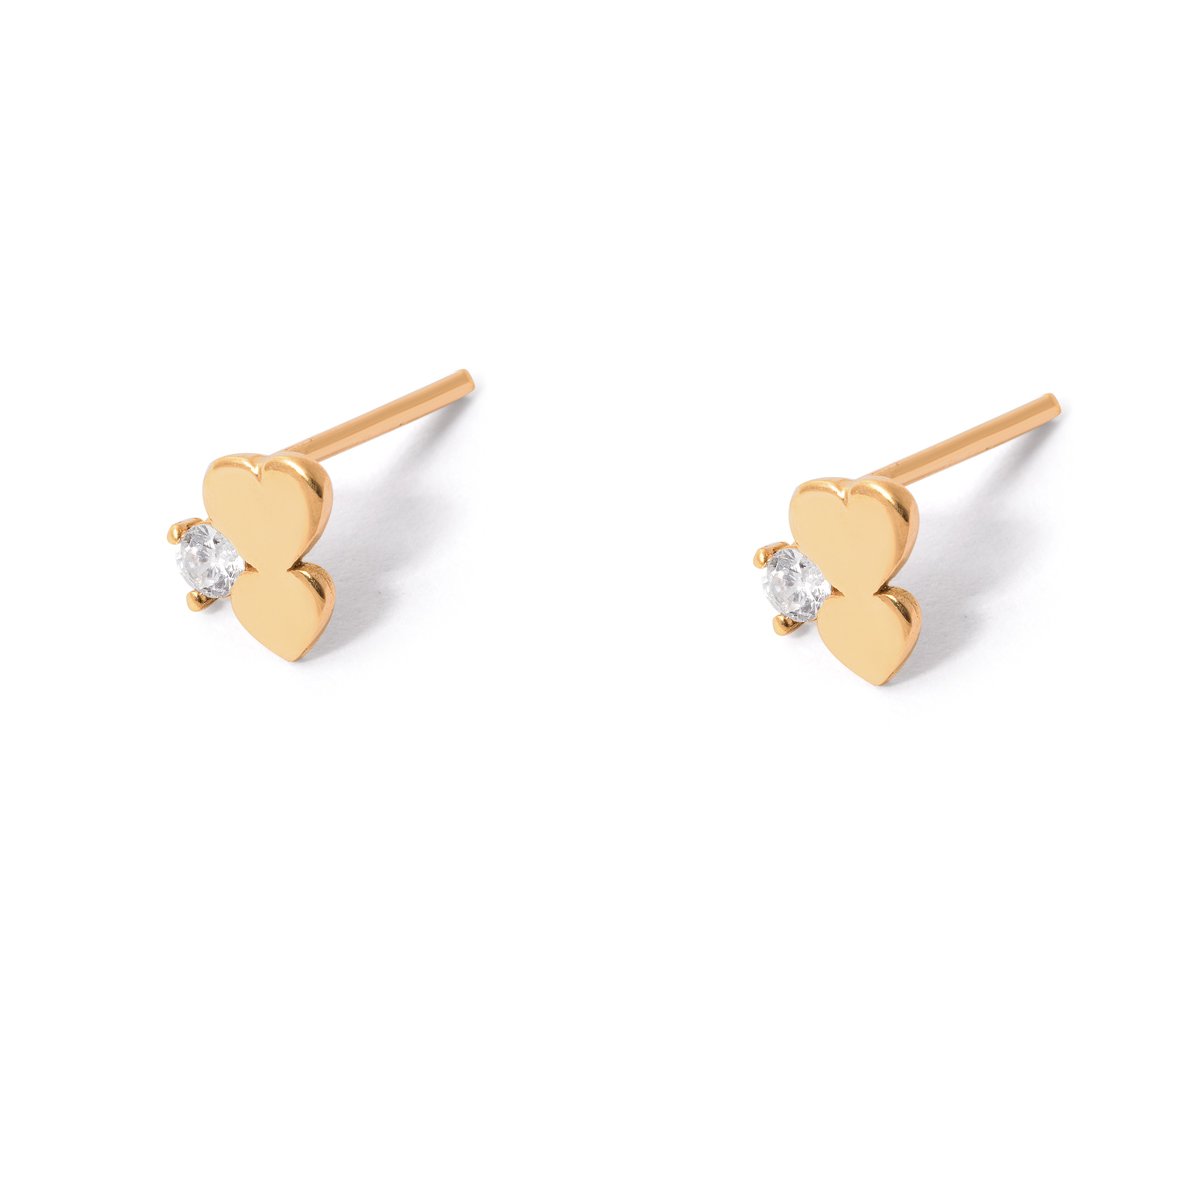 Gold earrings with two Atri hearts g